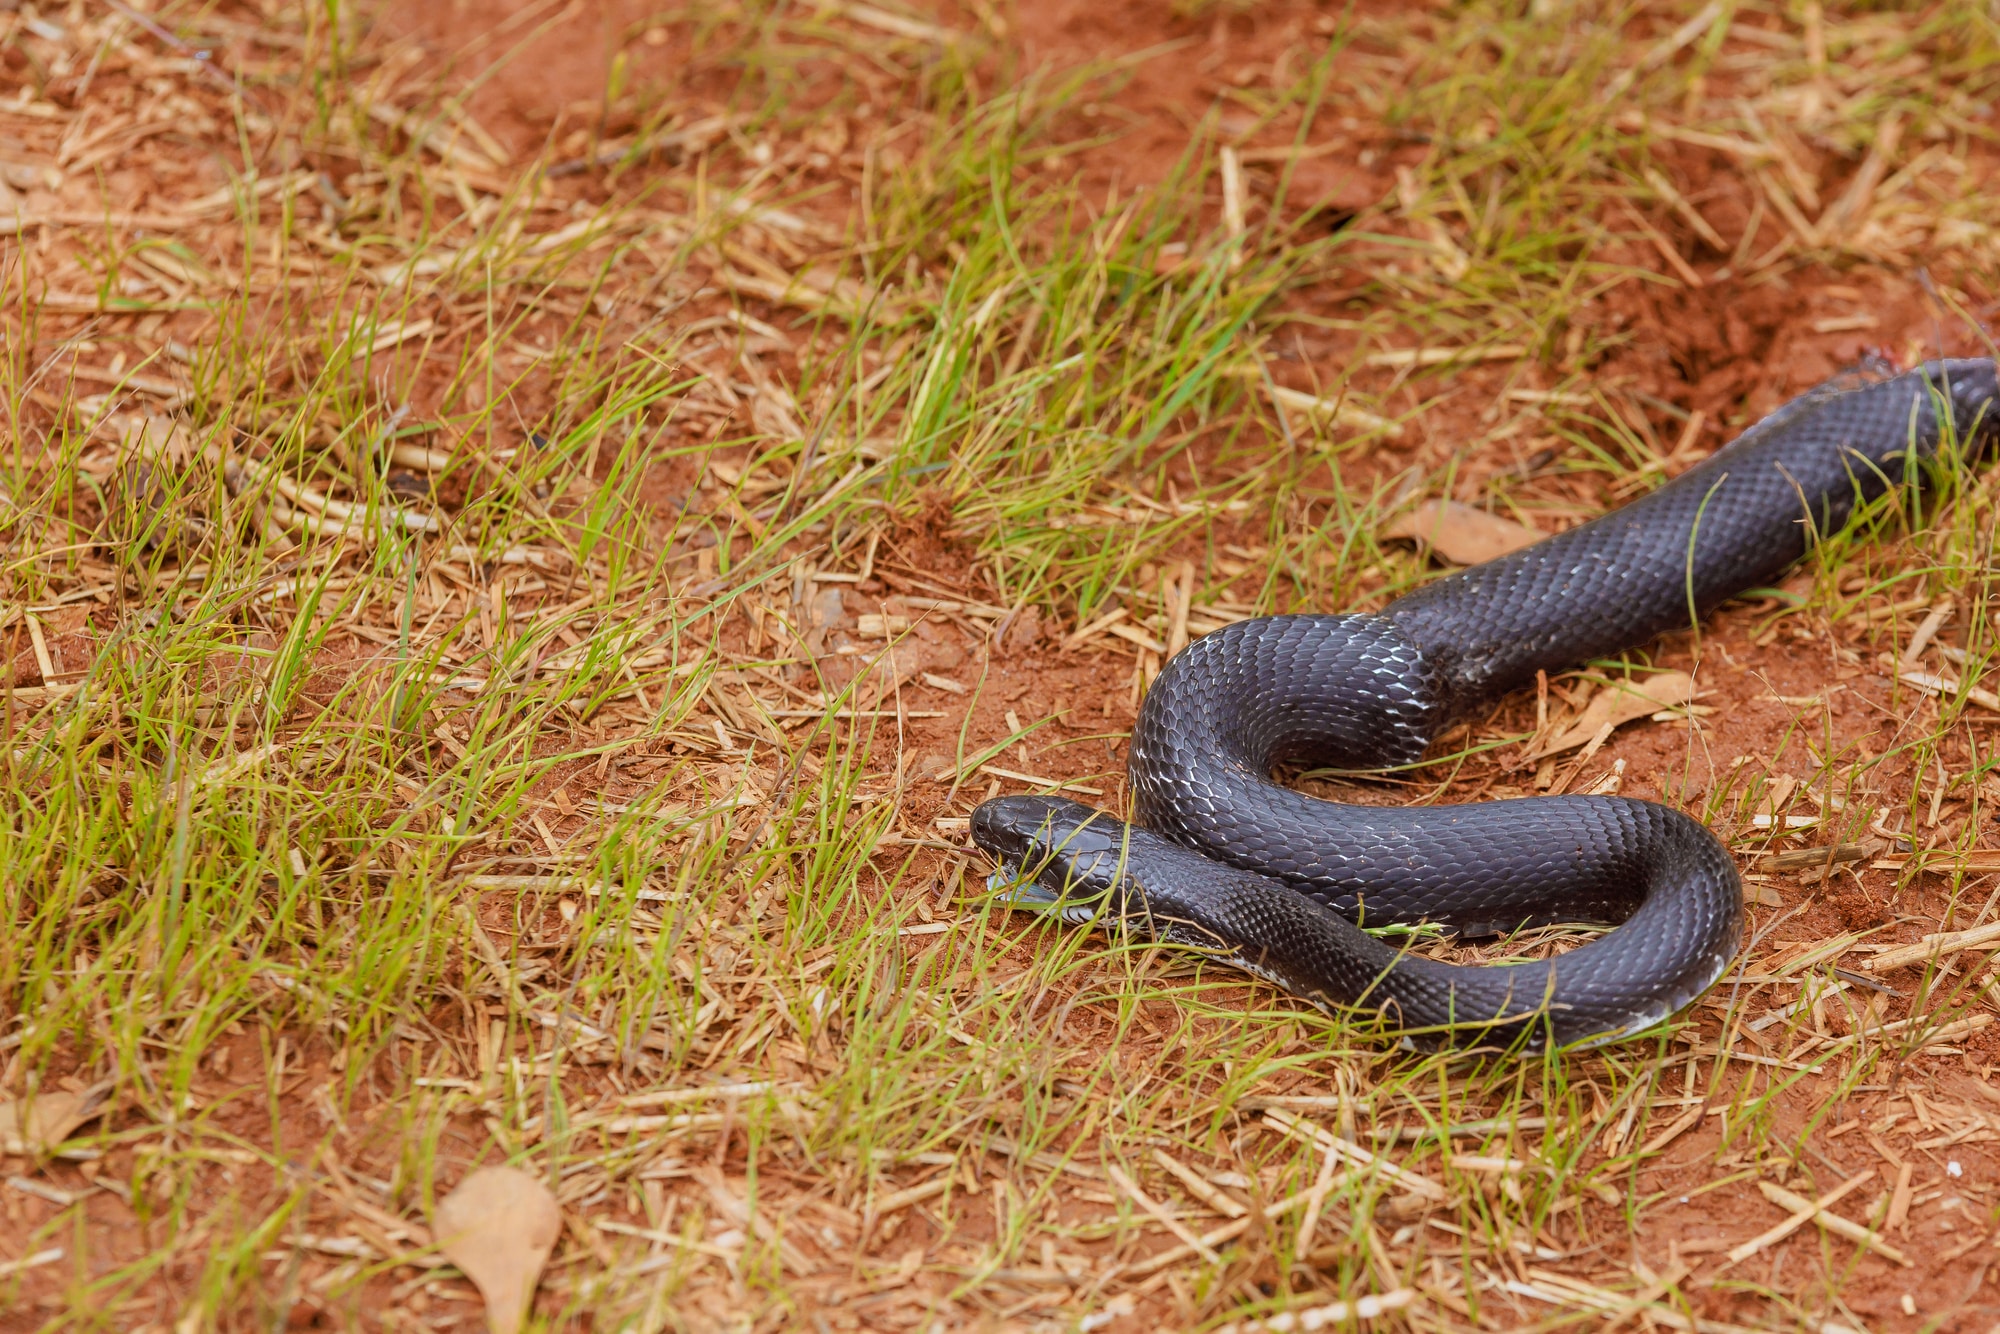 An Eastern Rat Snake, on the forest floor.